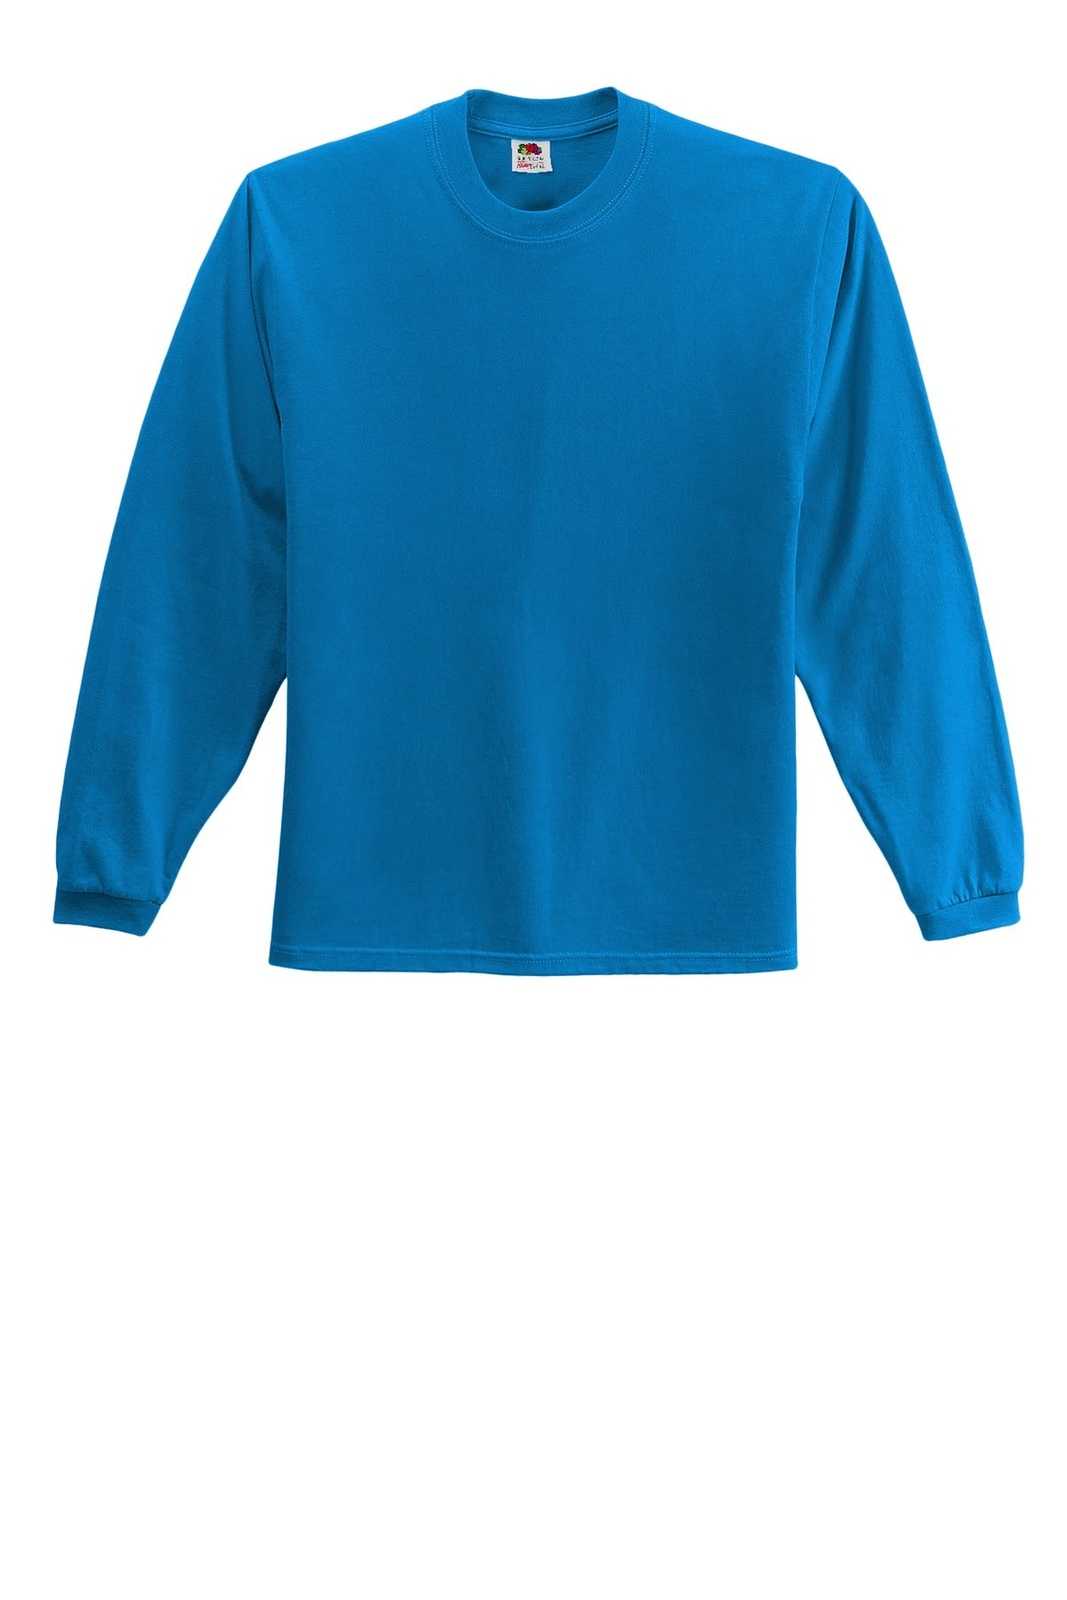 Fruit of the Loom 4930 HD Cotton 100% Cotton Long Sleeve T-Shirt - Pacific Blue - HIT a Double